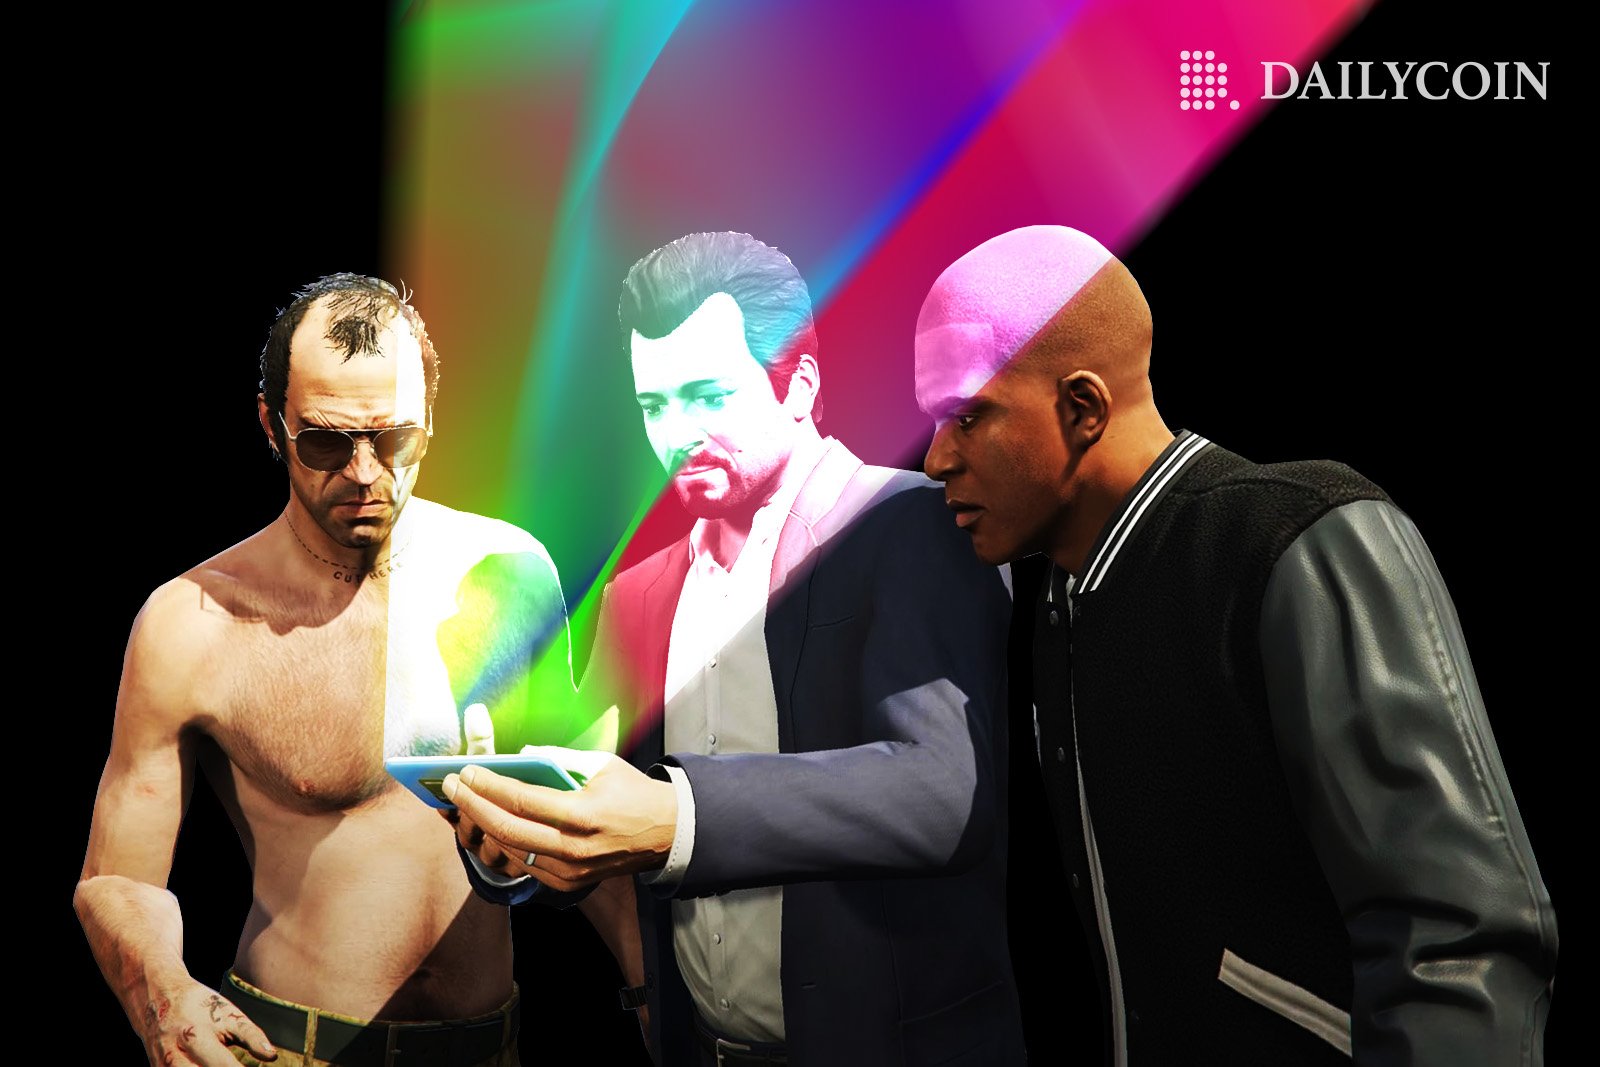 Trevor, Michael, and Franklin from GTAV using a smartphone looking at GTA6 NFTs.